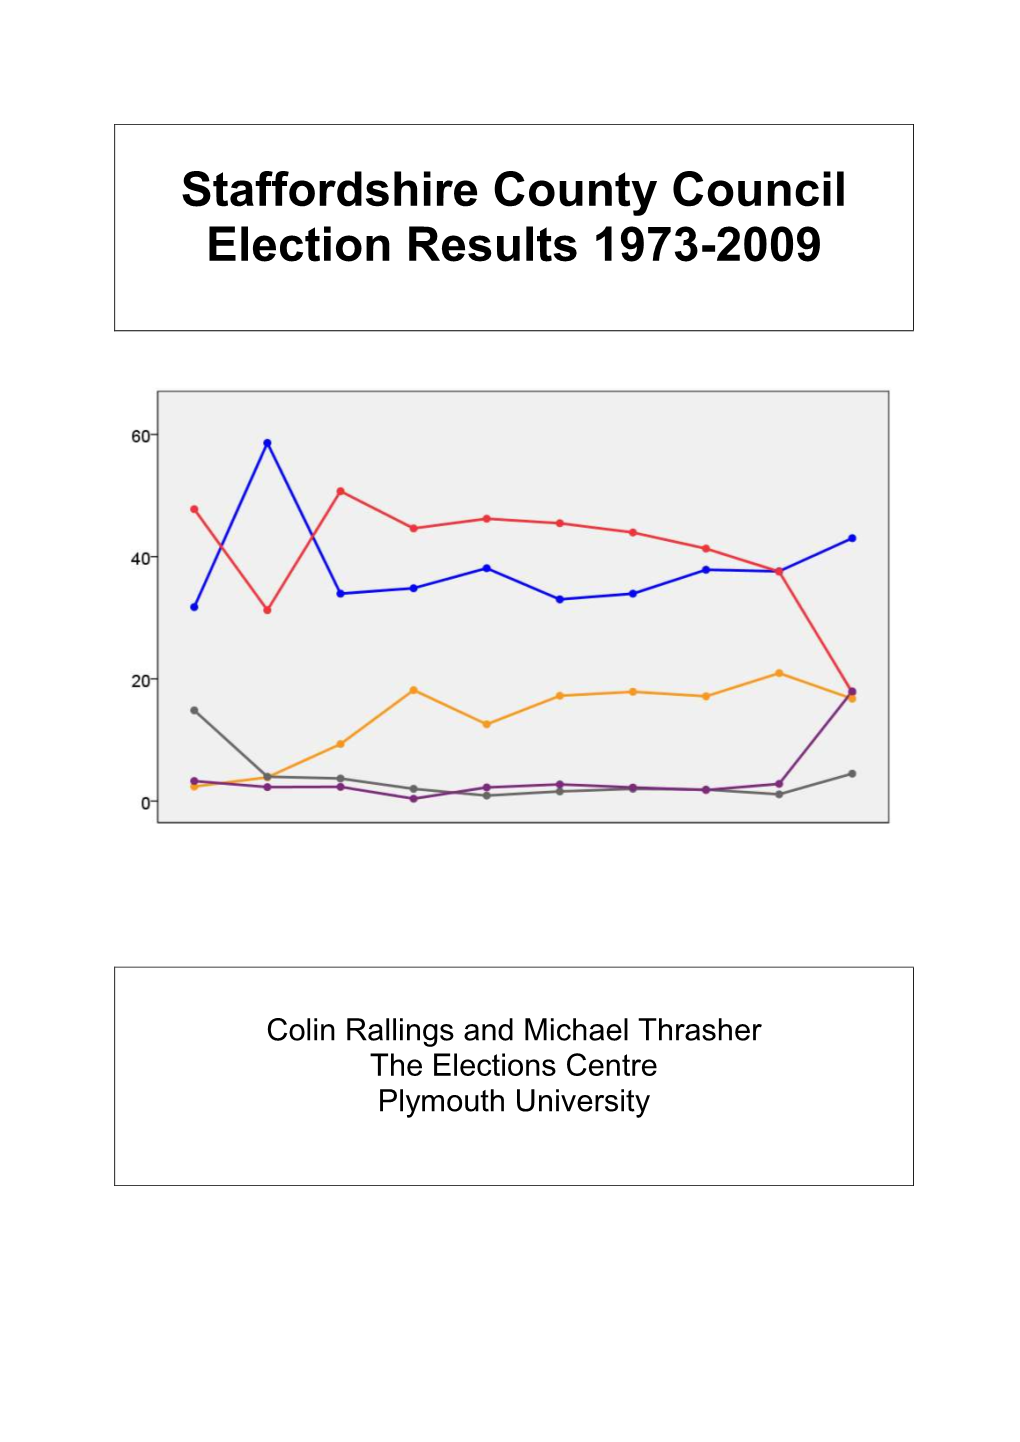 Staffordshire County Council Election Results 1973-2009